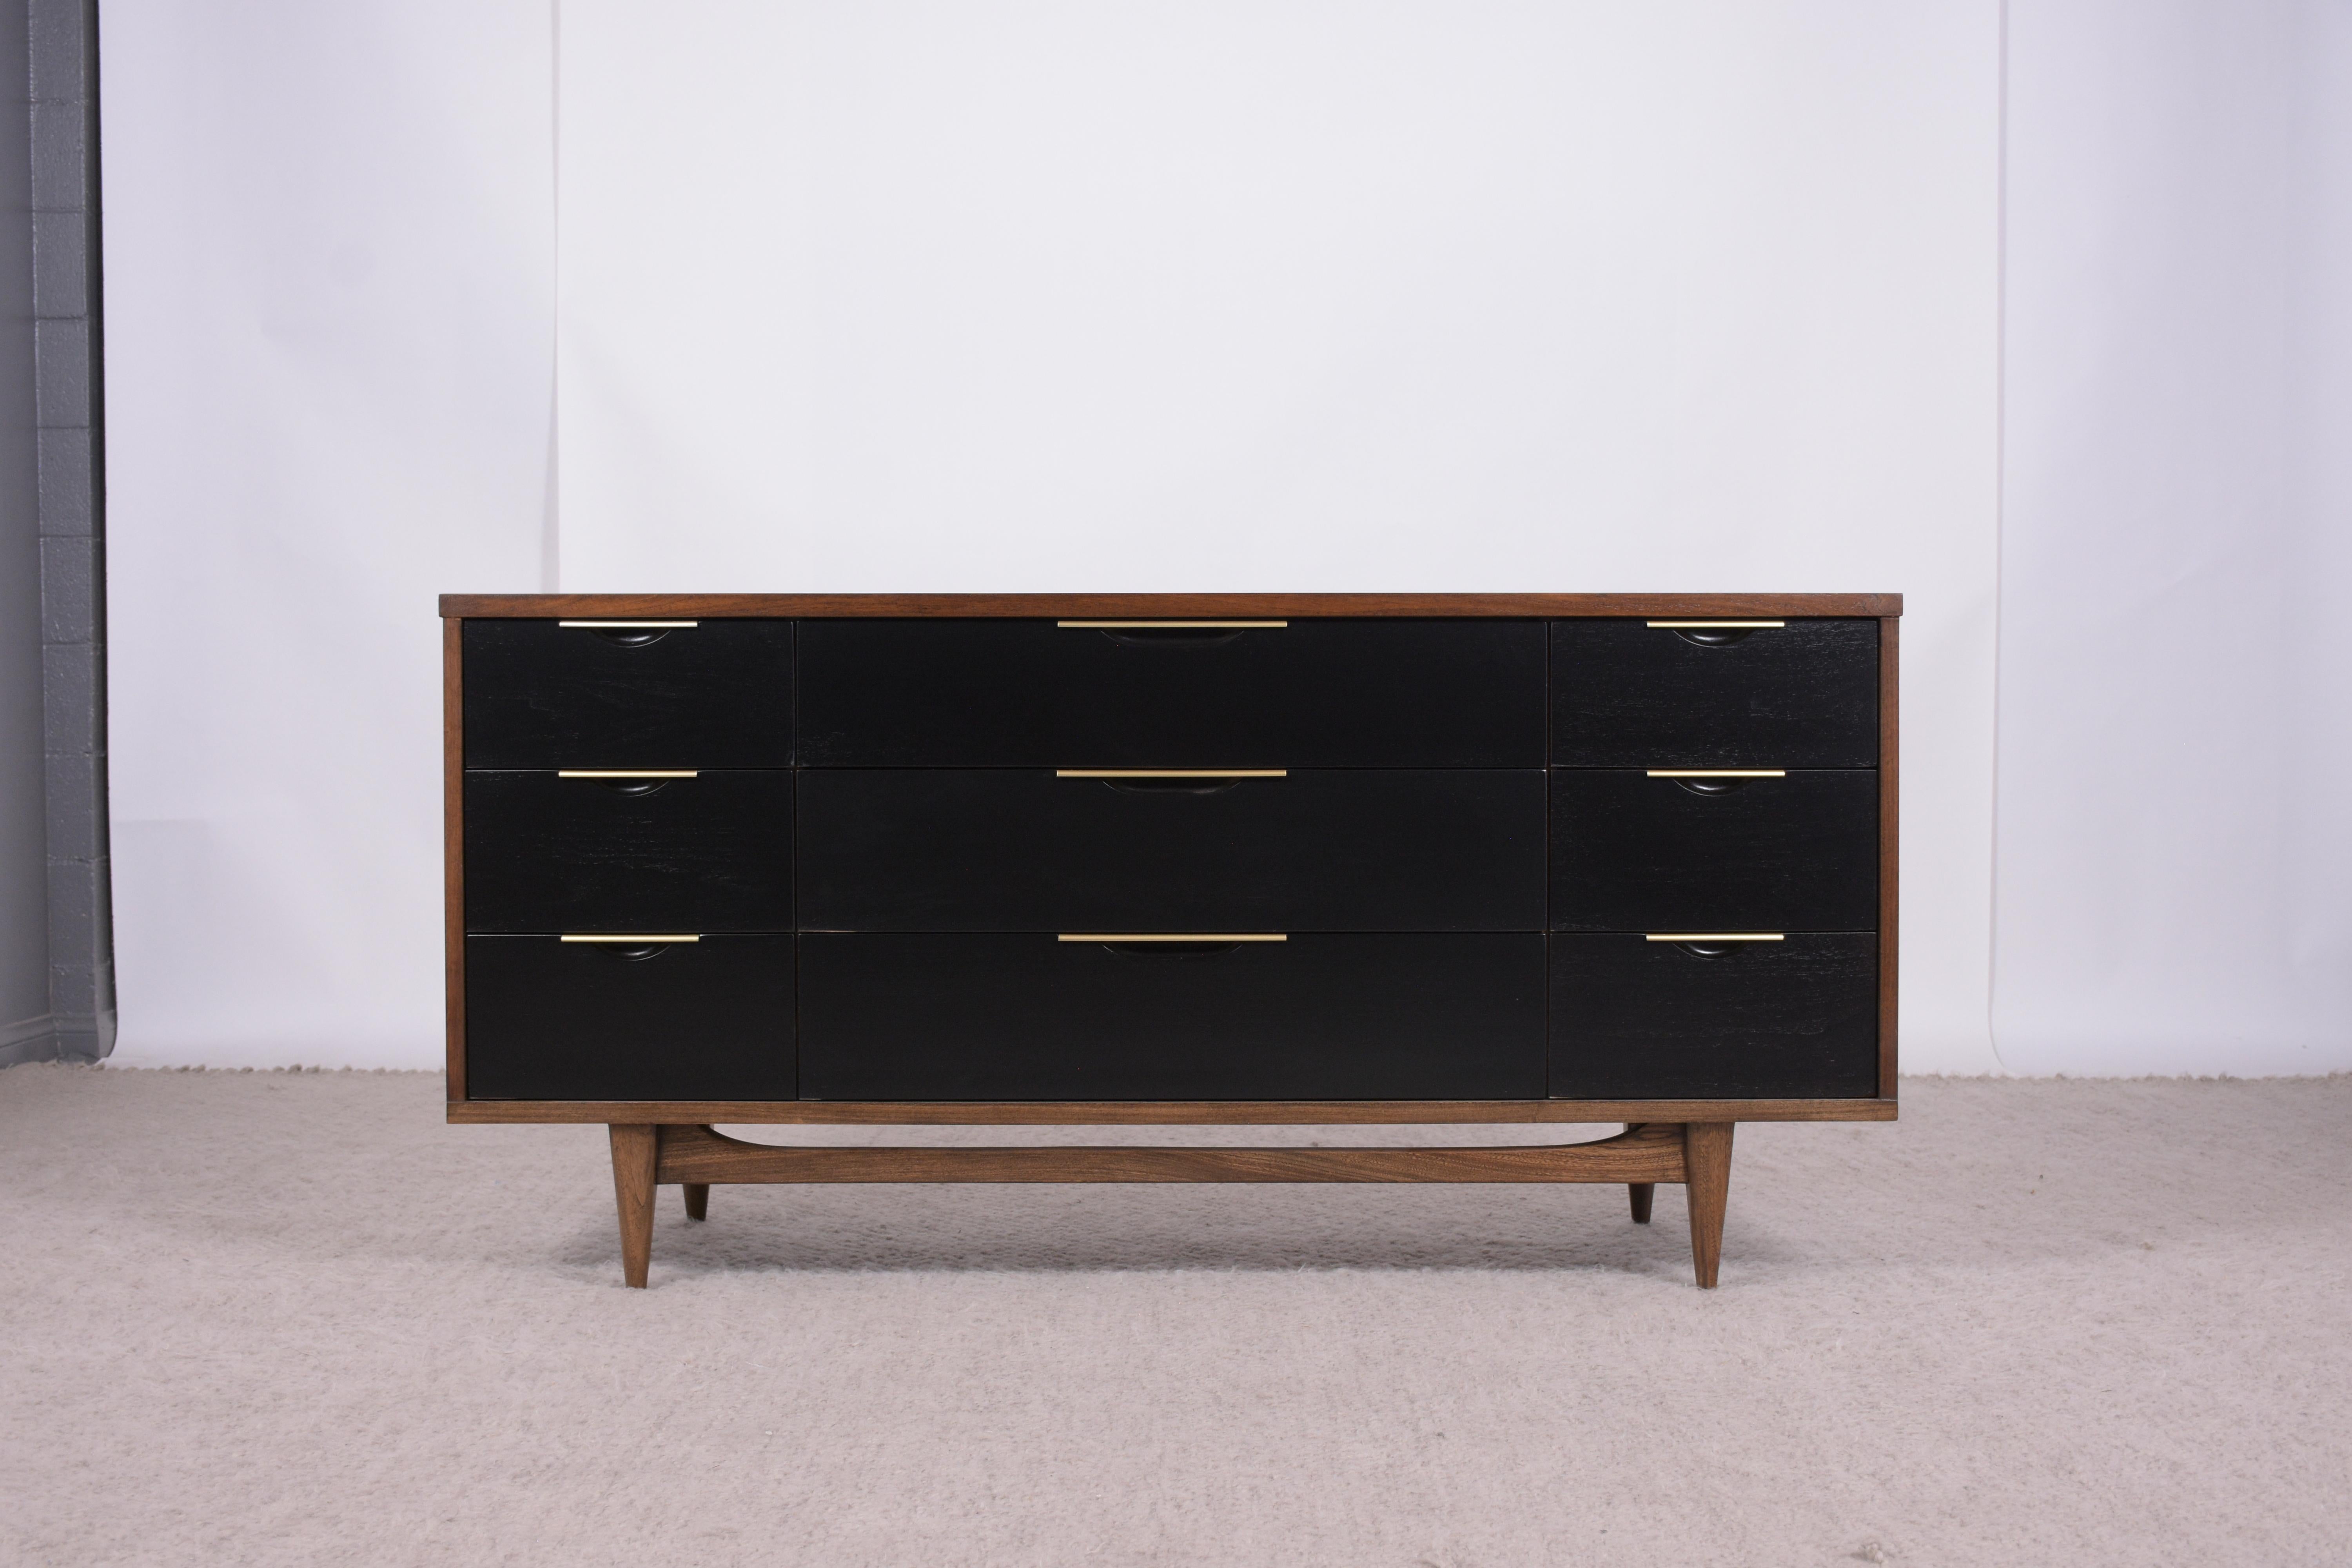 Discover the exceptional beauty of our Mid-Century Walnut Dresser, a masterpiece of craftsmanship and design, professionally restored to impeccable condition. Hand-crafted from high-quality walnut wood, this dresser is a stunning addition to any